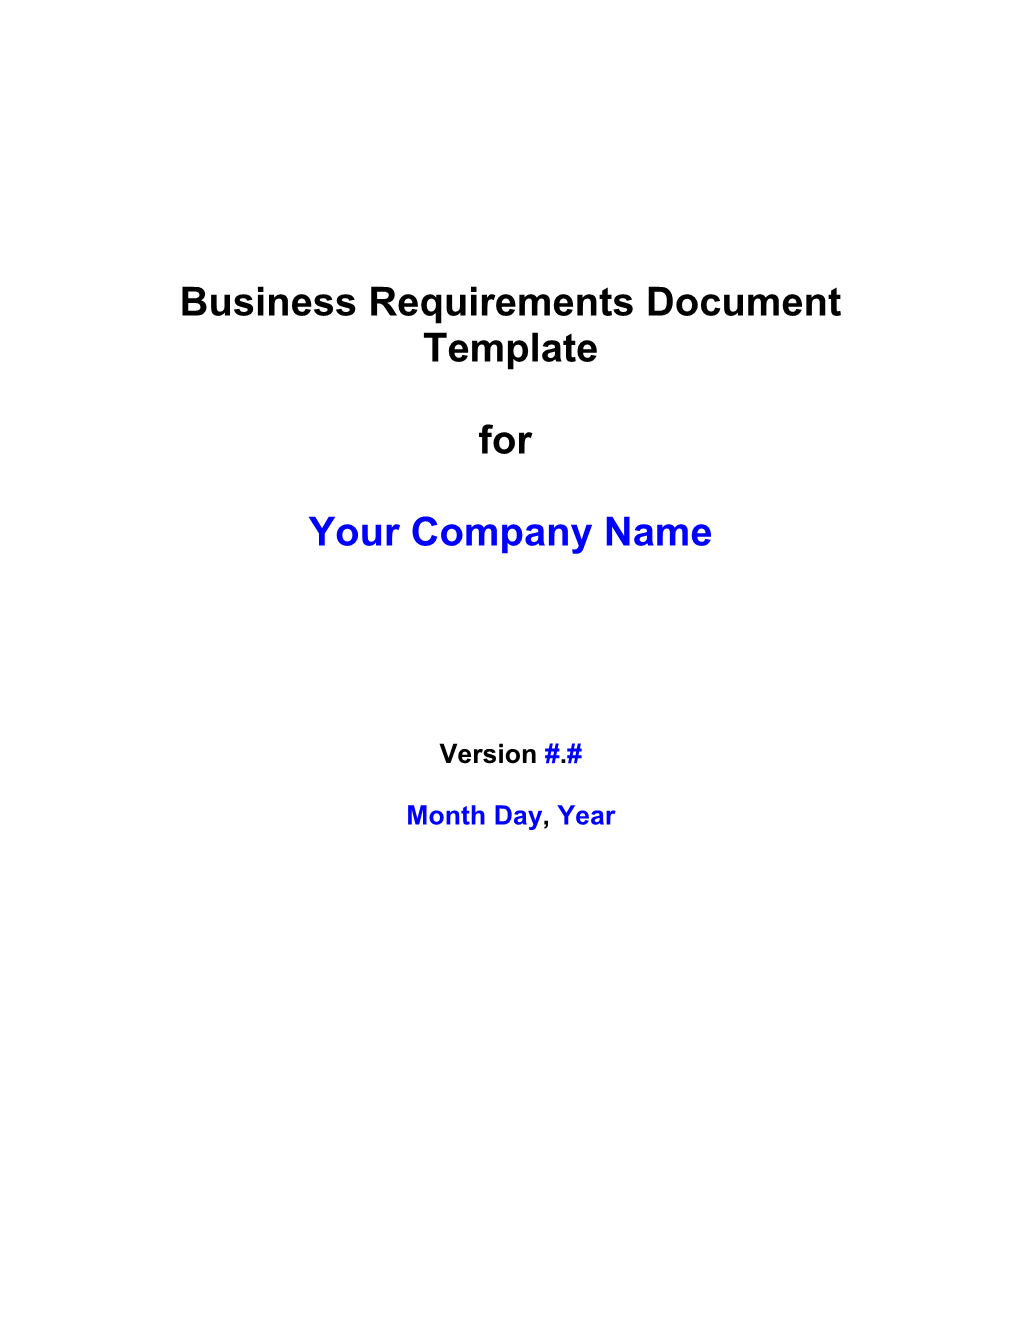 (Your Company Name) Business Requirements Specification